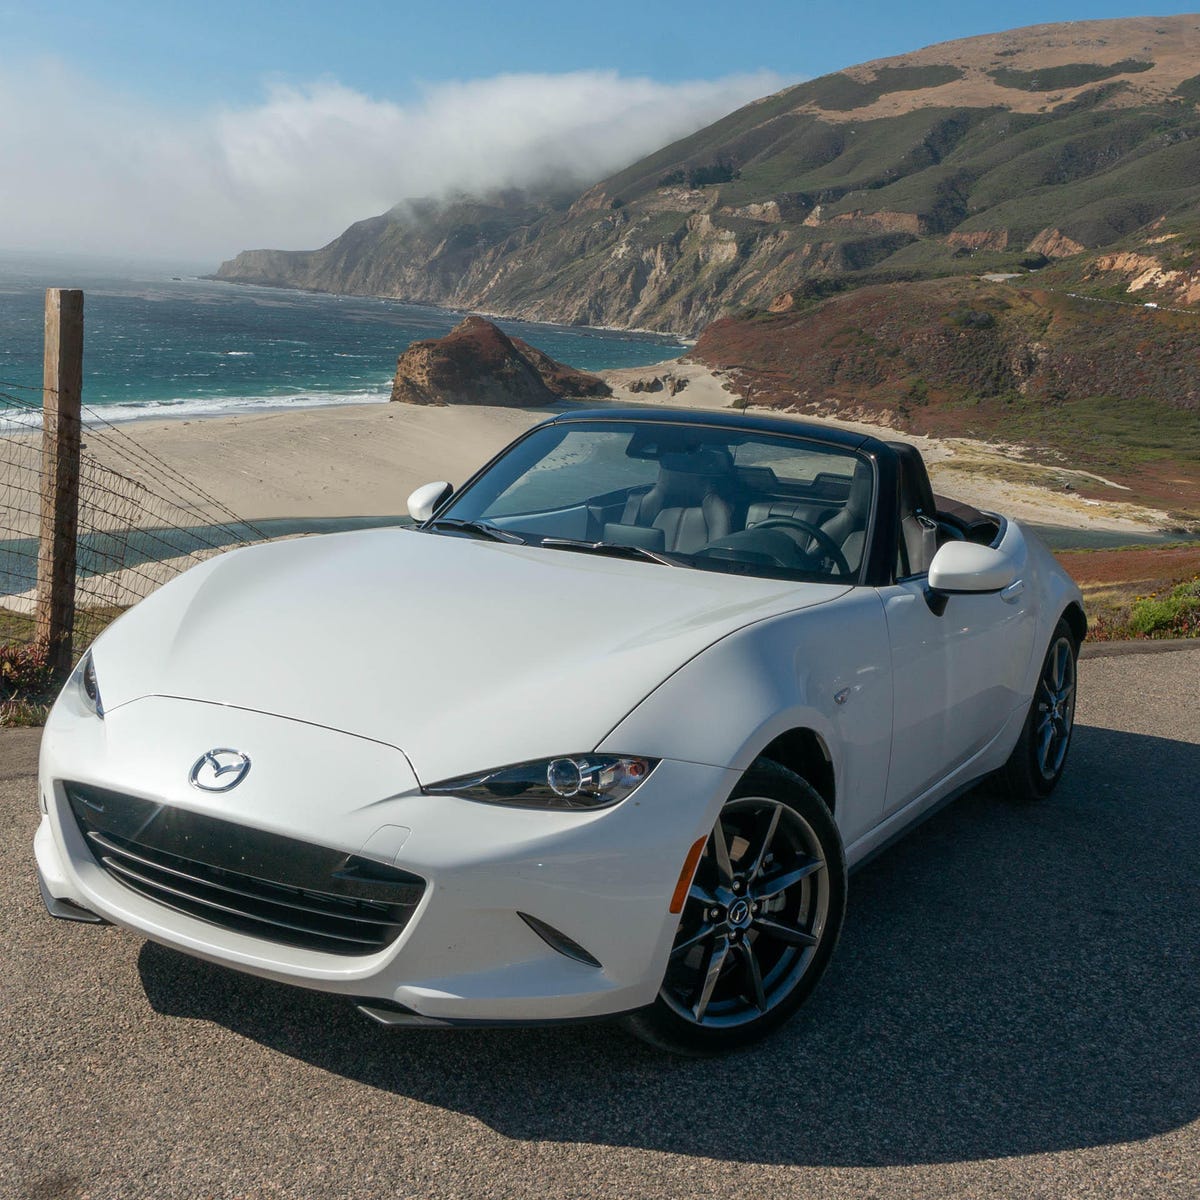 2019 Mazda MX-5 Miata review: More power, more features, smarter options -  CNET